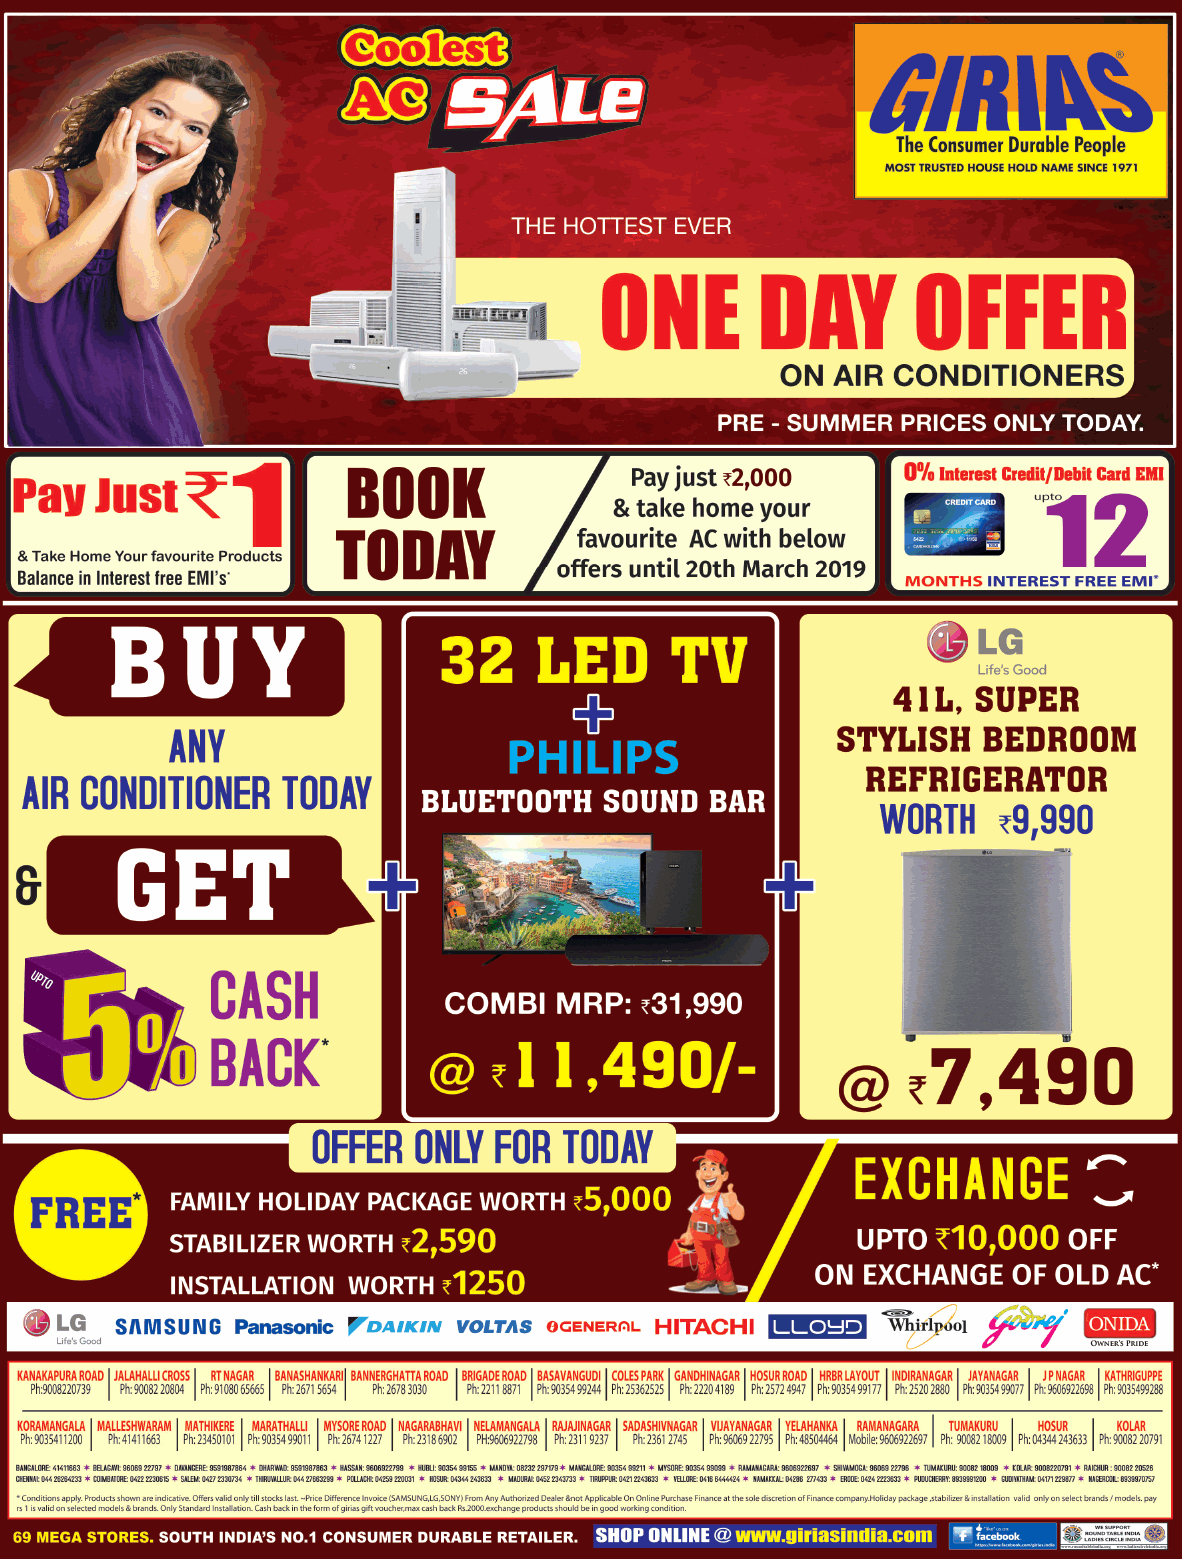 girias-coolest-ac-sale-one-day-offer-on-air-conditioners-ad-times-of-india-bangalore-13-03-2019.png